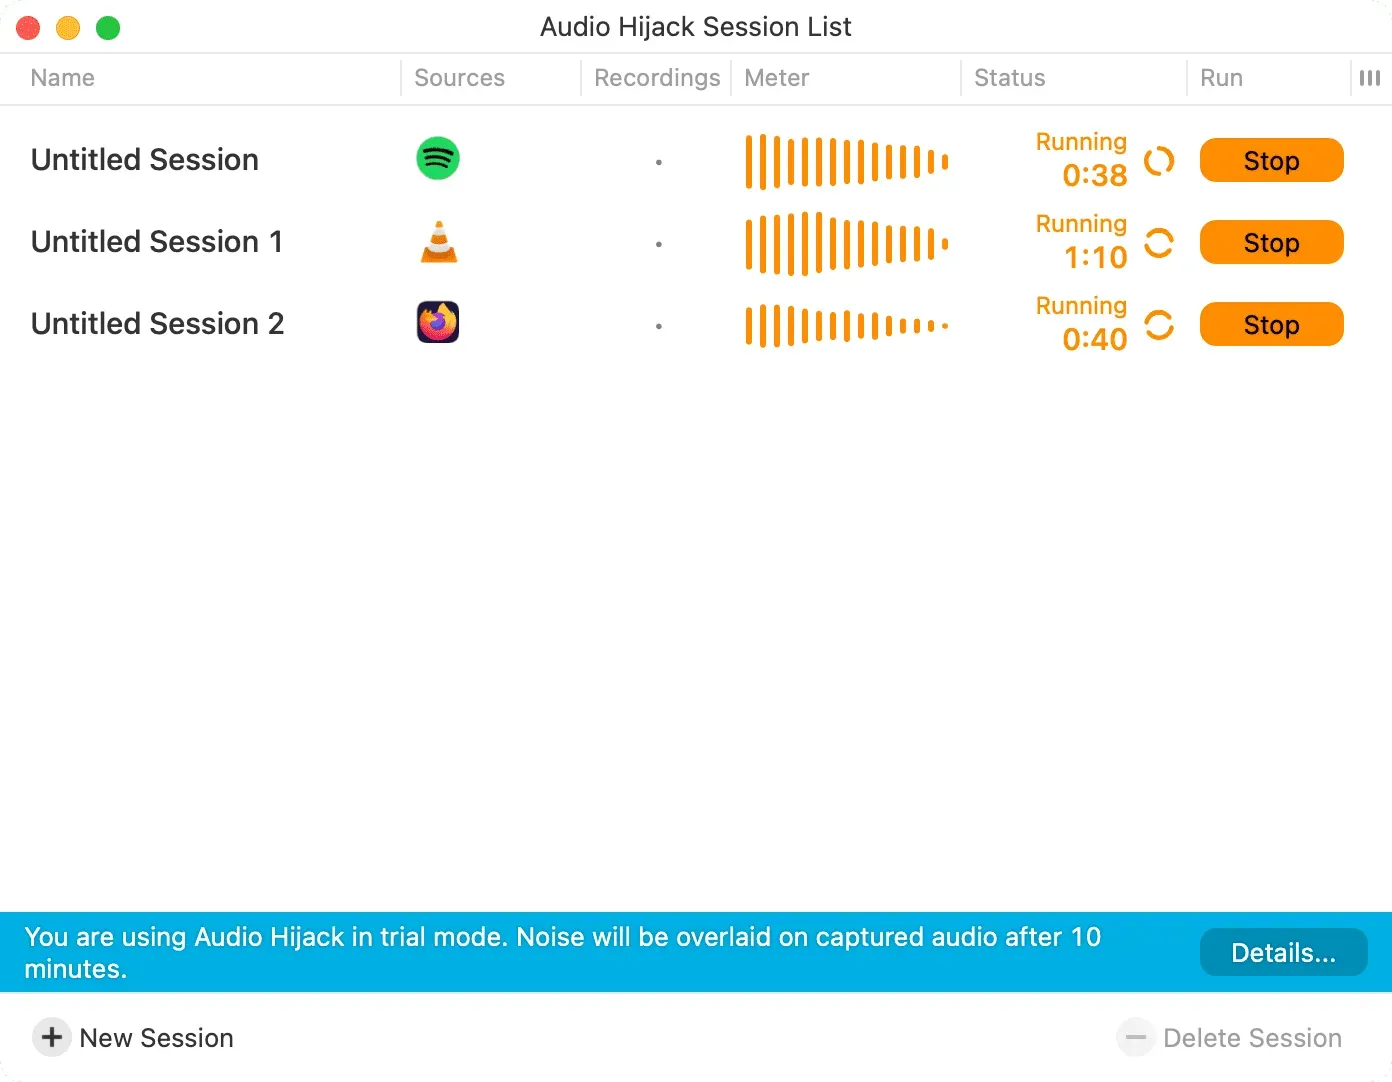 Running sessions in Audio Hijack on Mac